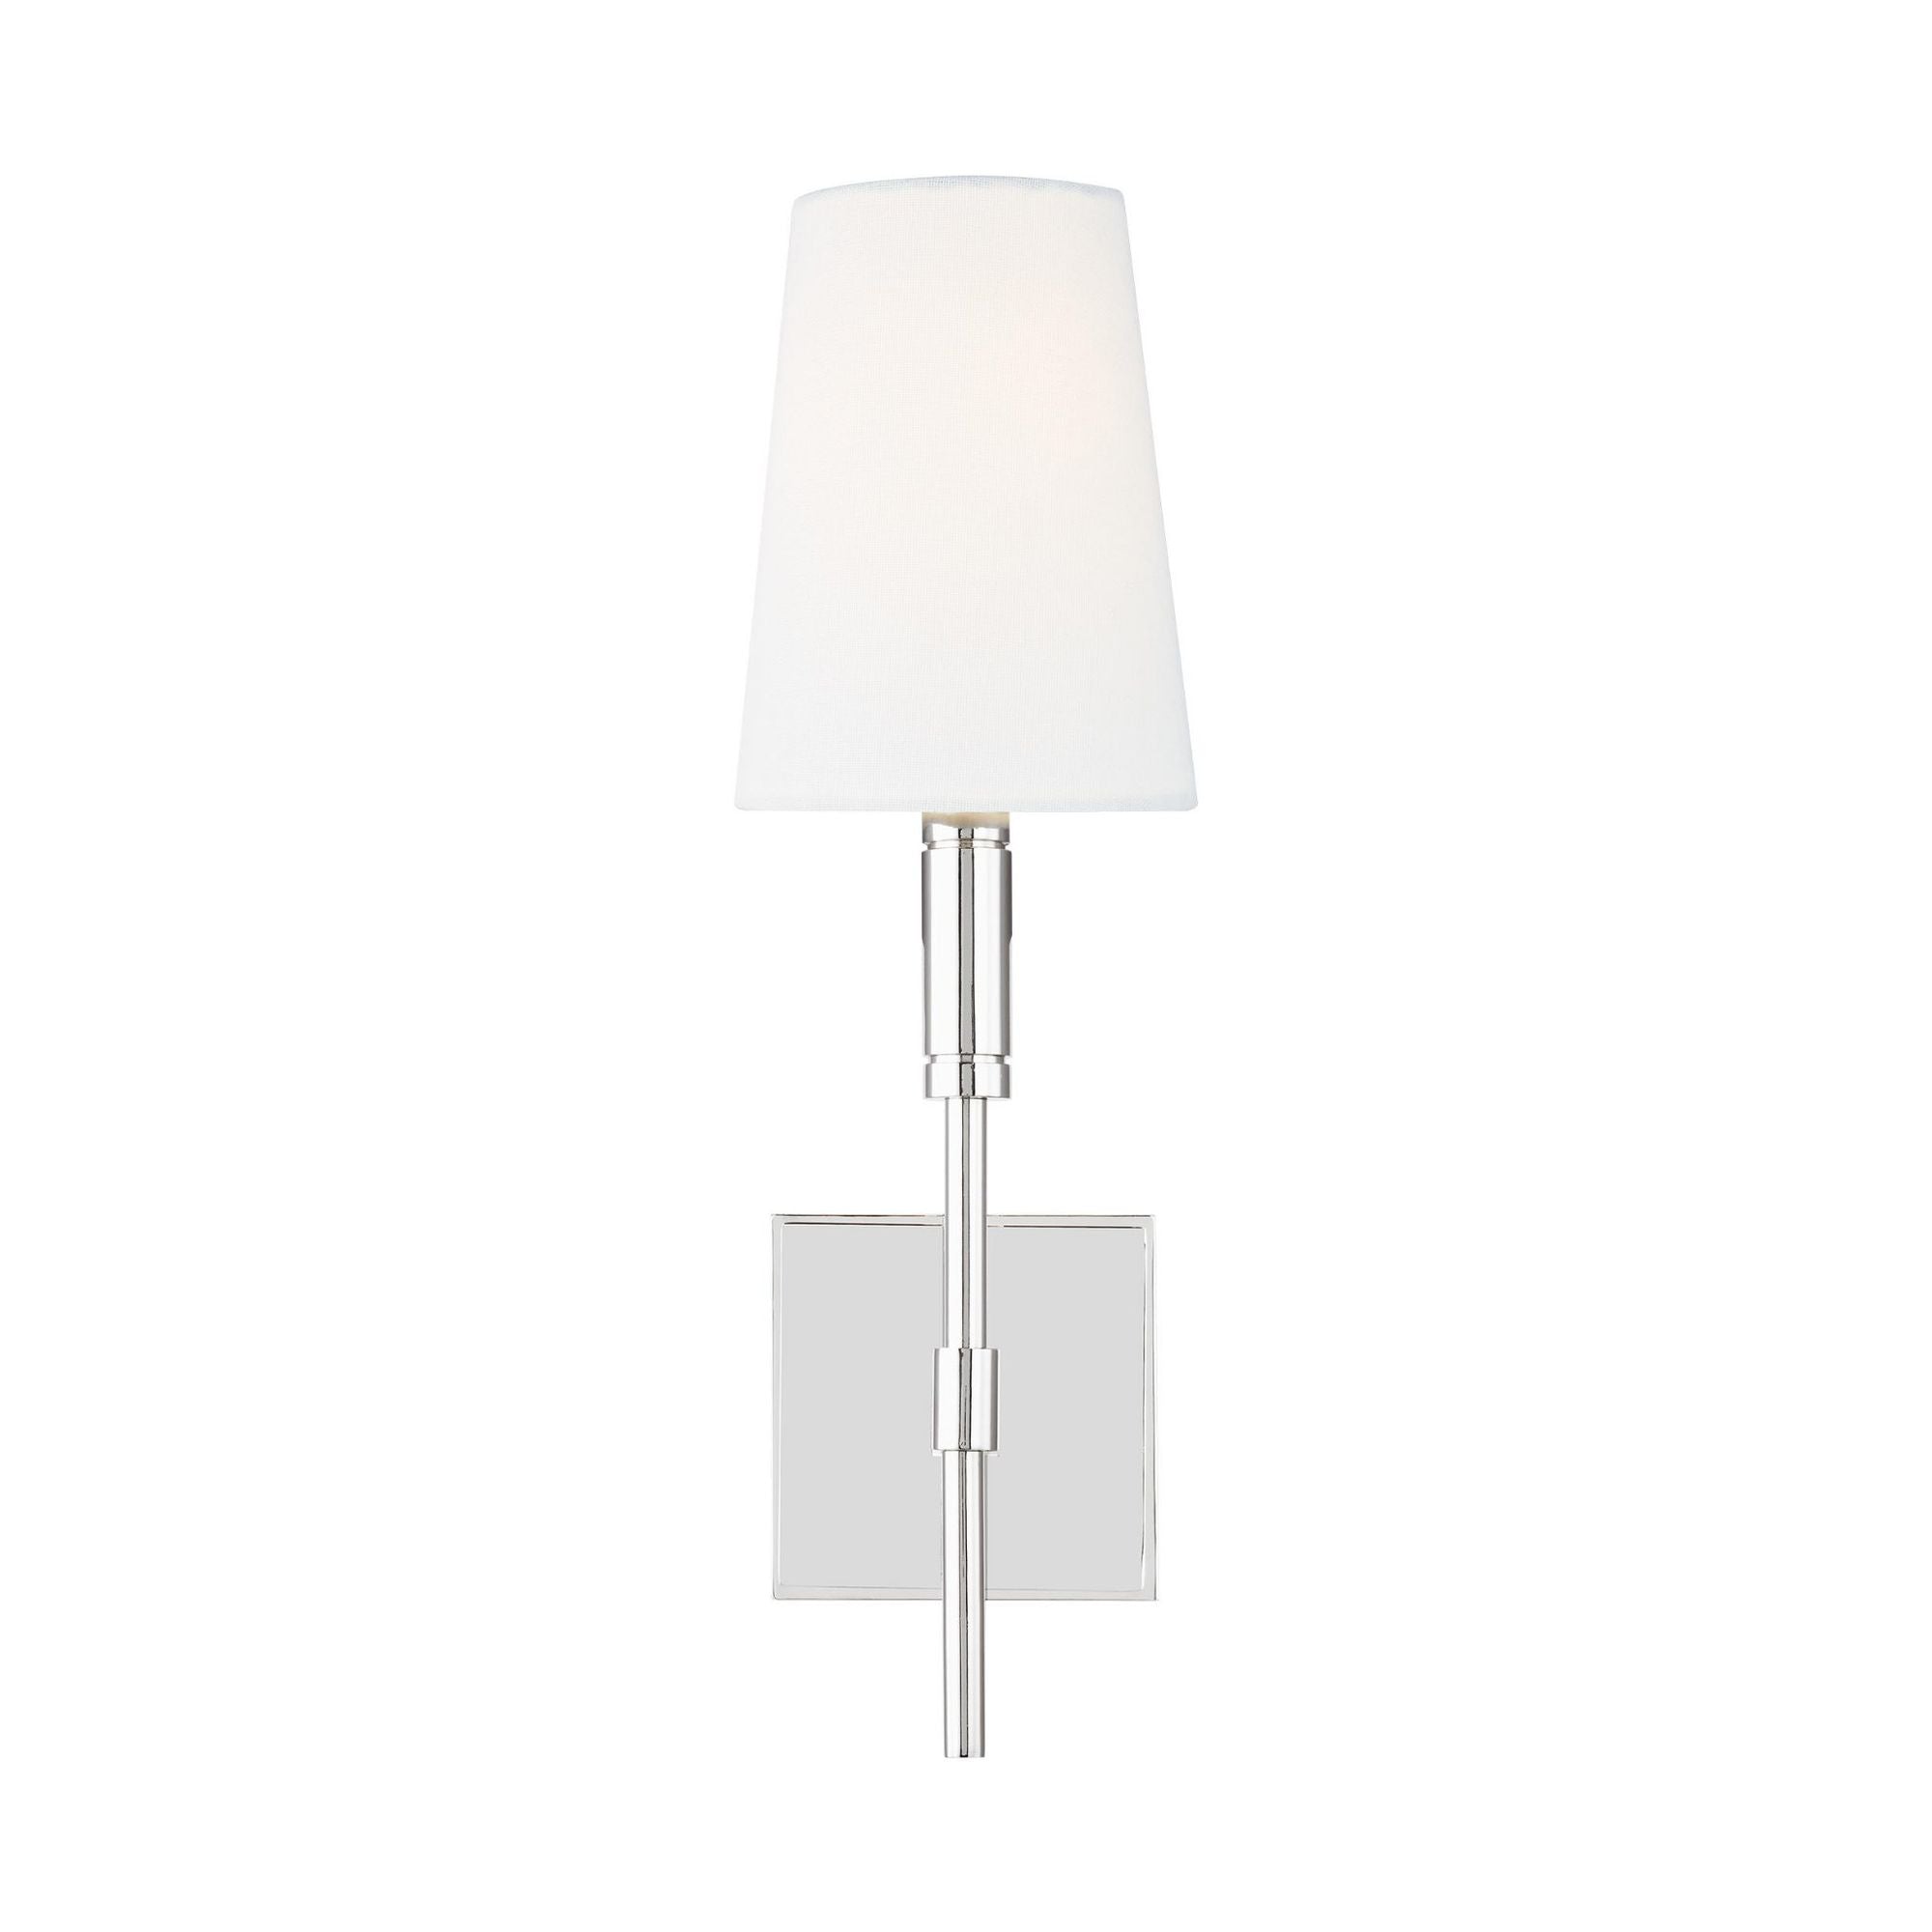 Thomas O'Brien Beckham Classic Sconce in Polished Nickel